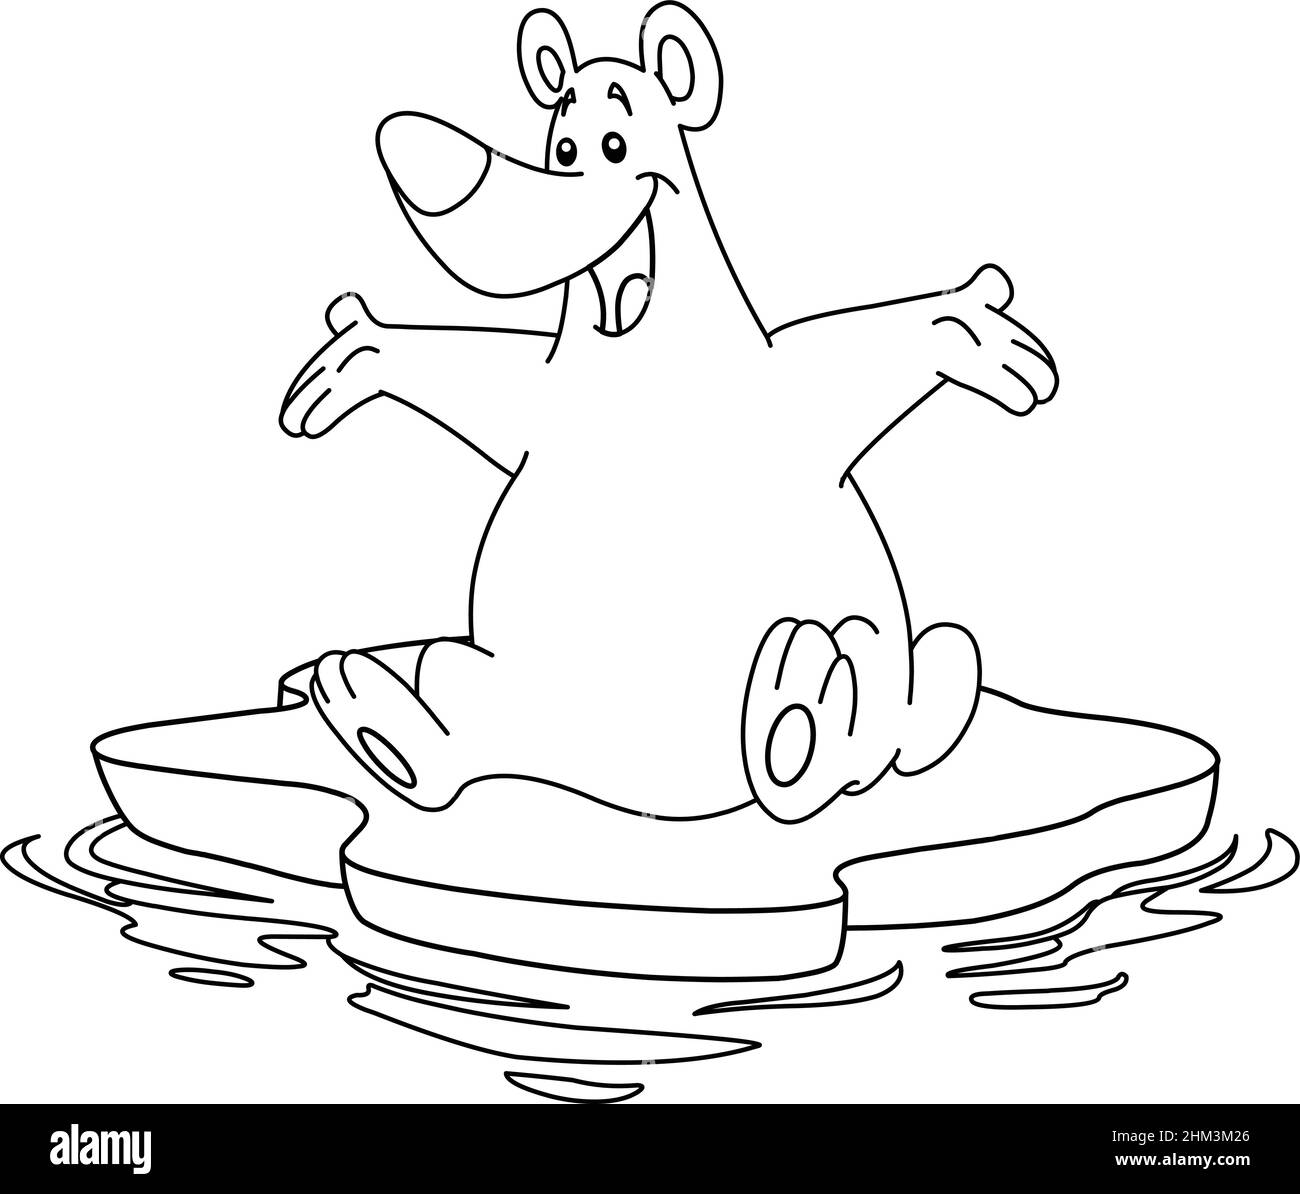 Outlined happy polar bear sitting on an ice floe iceberg. Vector line art illustration coloring page. Stock Vector